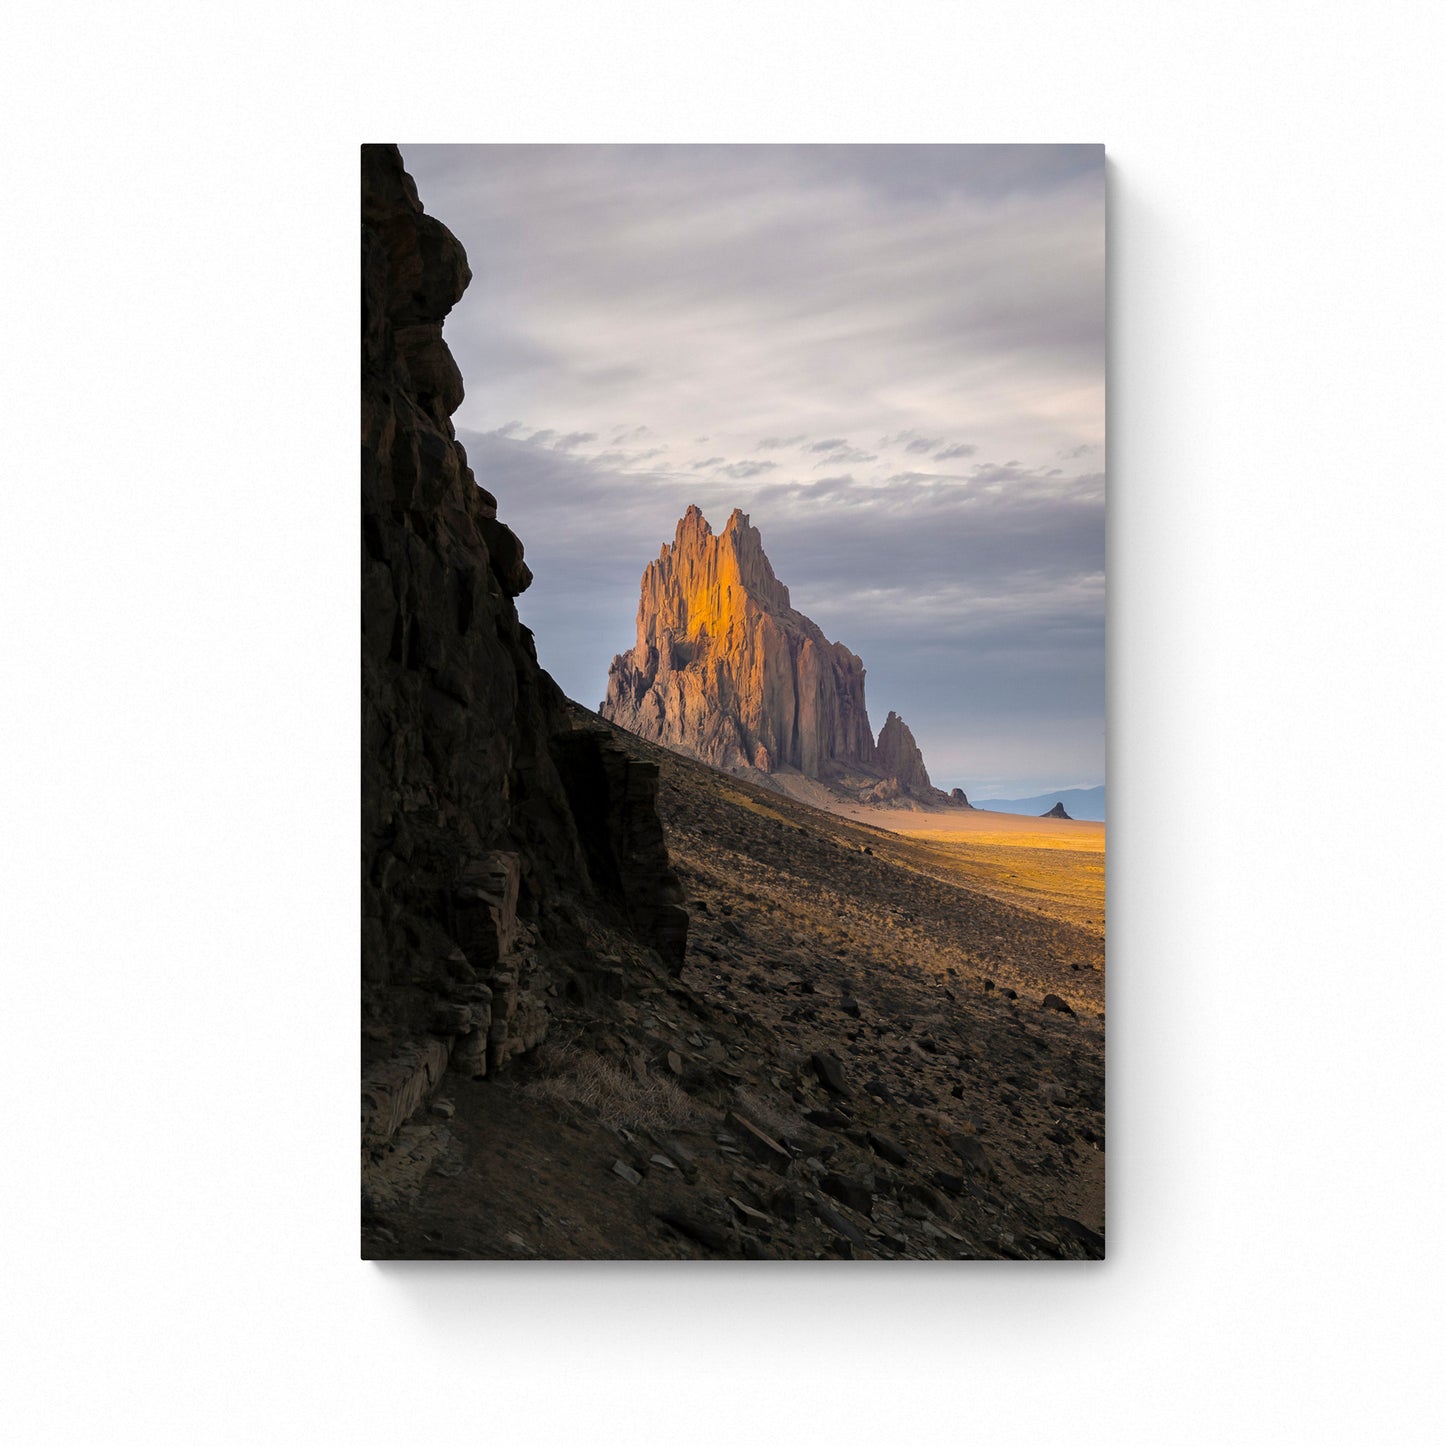 shiprock pictures